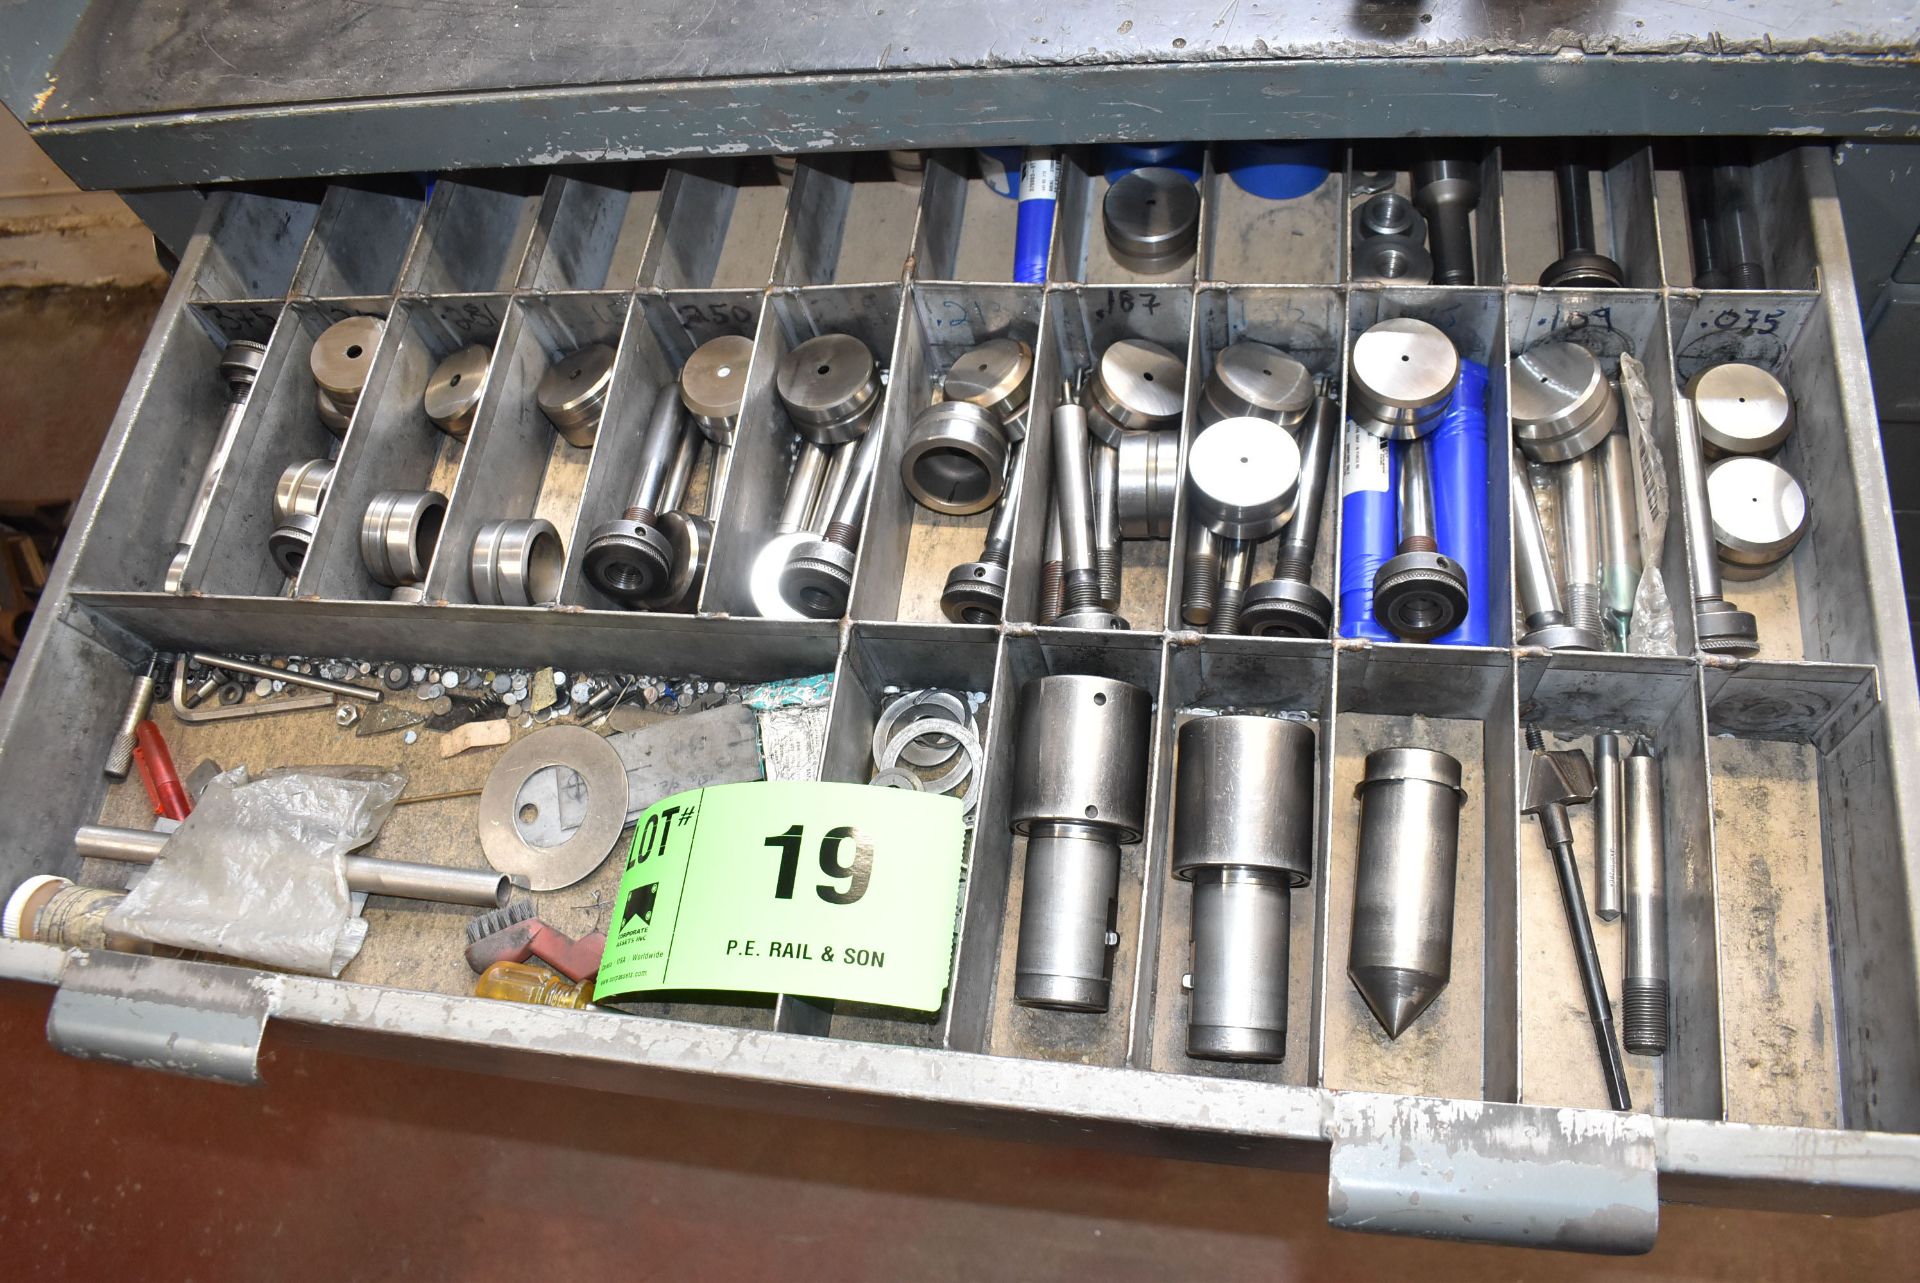 LOT/ CONTENTS OF DRAWER CONSISTING OF PUNCH TOOLING (LOCATED AT 1097 PARISIEN ST)